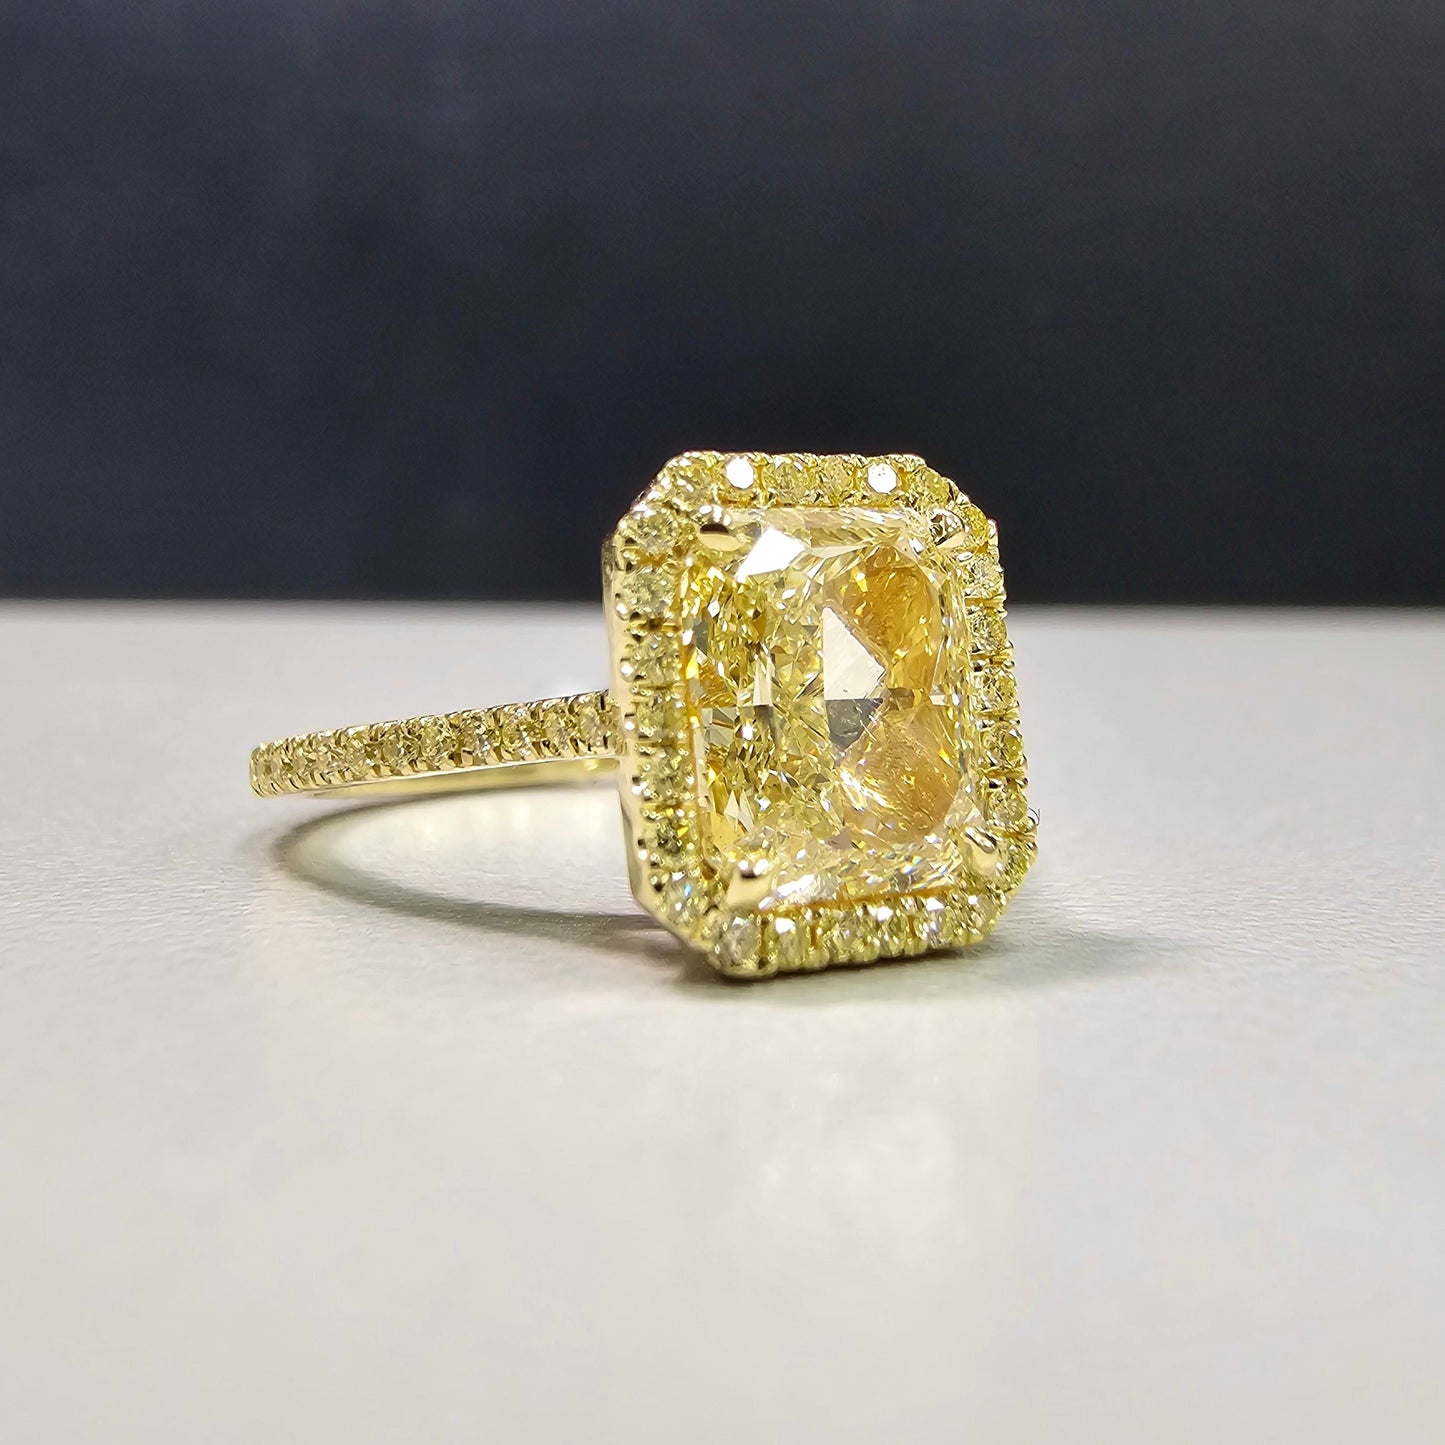 2.28 Carat Center Diamond GIA Light Yellow Diamond (Y-Z) Radiant Cut Diamond 0.30 Carats of Fancy Yellow Rounds VS1 Clarity Medium Blue Fluorescence Excellent, Very Good cutting Set in 18k Yellow Gold GIA Certified Diamond Handmade in NYC